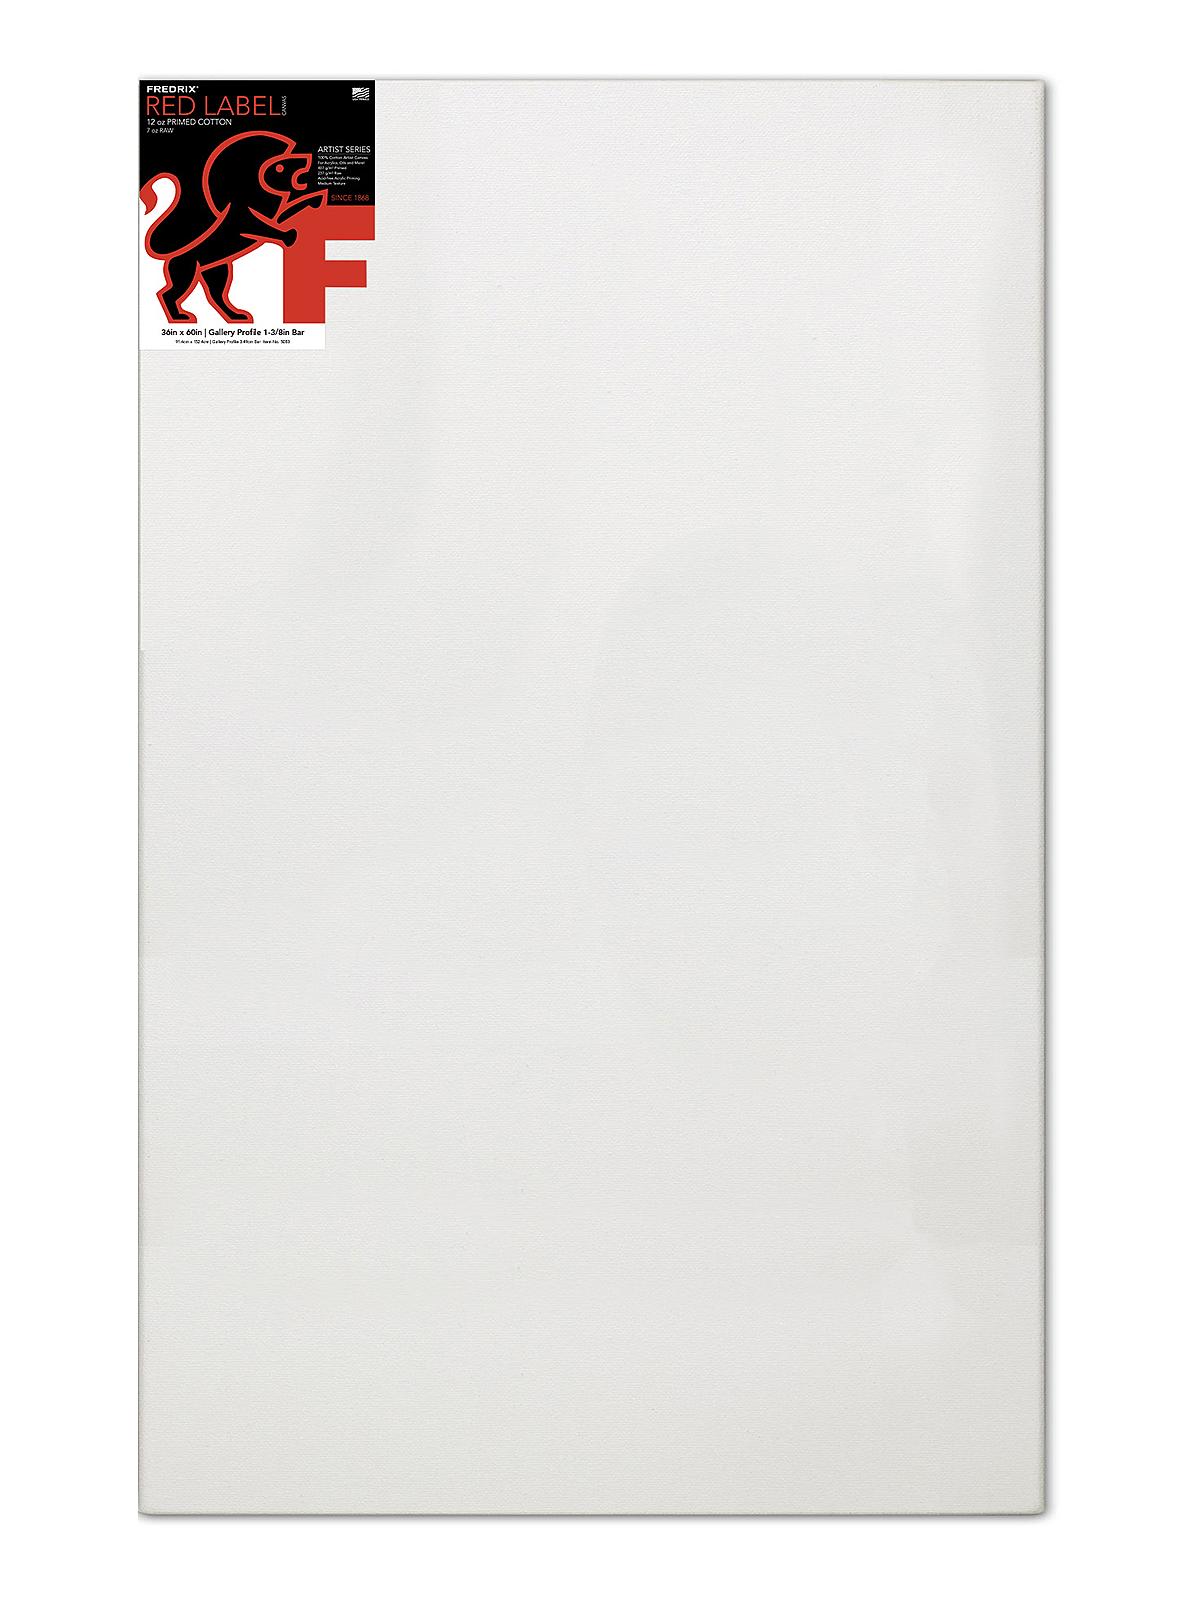 Red Label Gallerywrap Stretched Canvas 36 In. X 60 In. Each